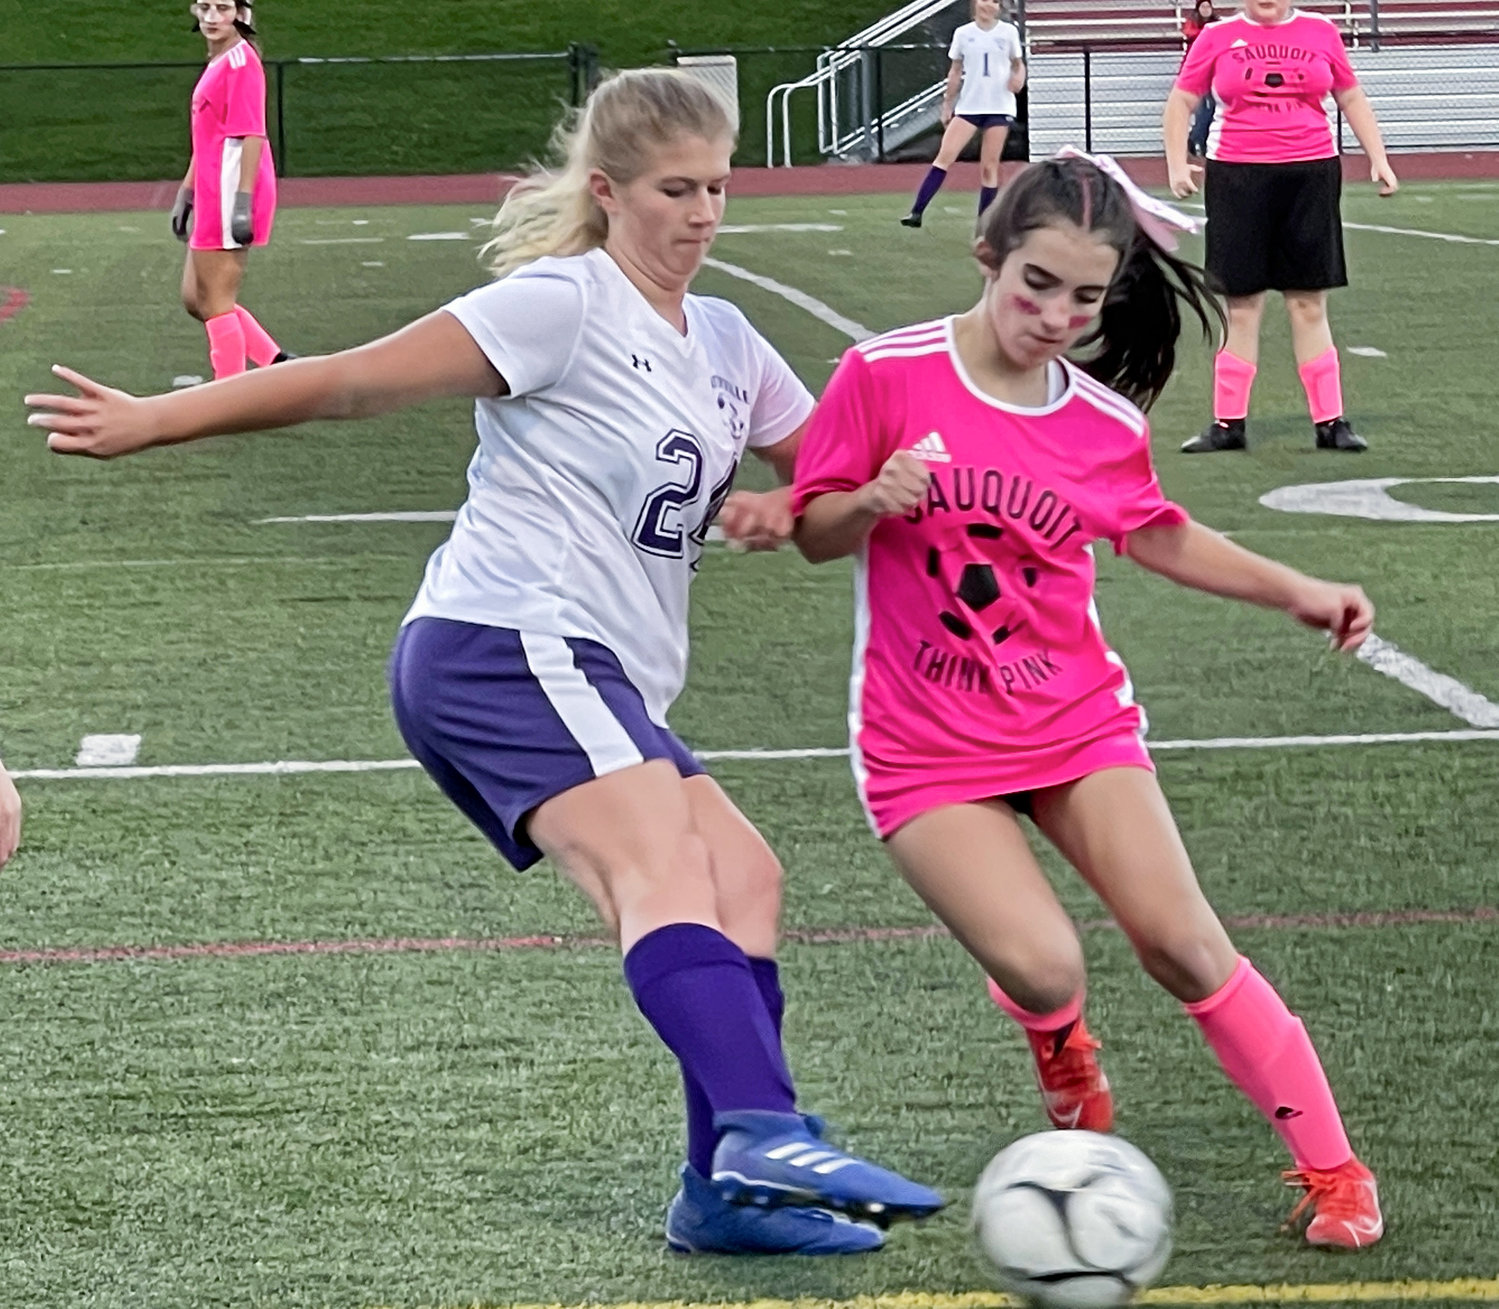 Waterville’s Allyson Ford, left, and Sauquoit Valley’s Celena Sperbeck fight for the ball during Sauquoit’s Think Pink game on Thursday night. Sauquoit Valley won 5-0 with goals by Kamryn Yerman, Addison Lazarek, Olivia Kalil, Kaitlyn Corr and Emma Yerman.